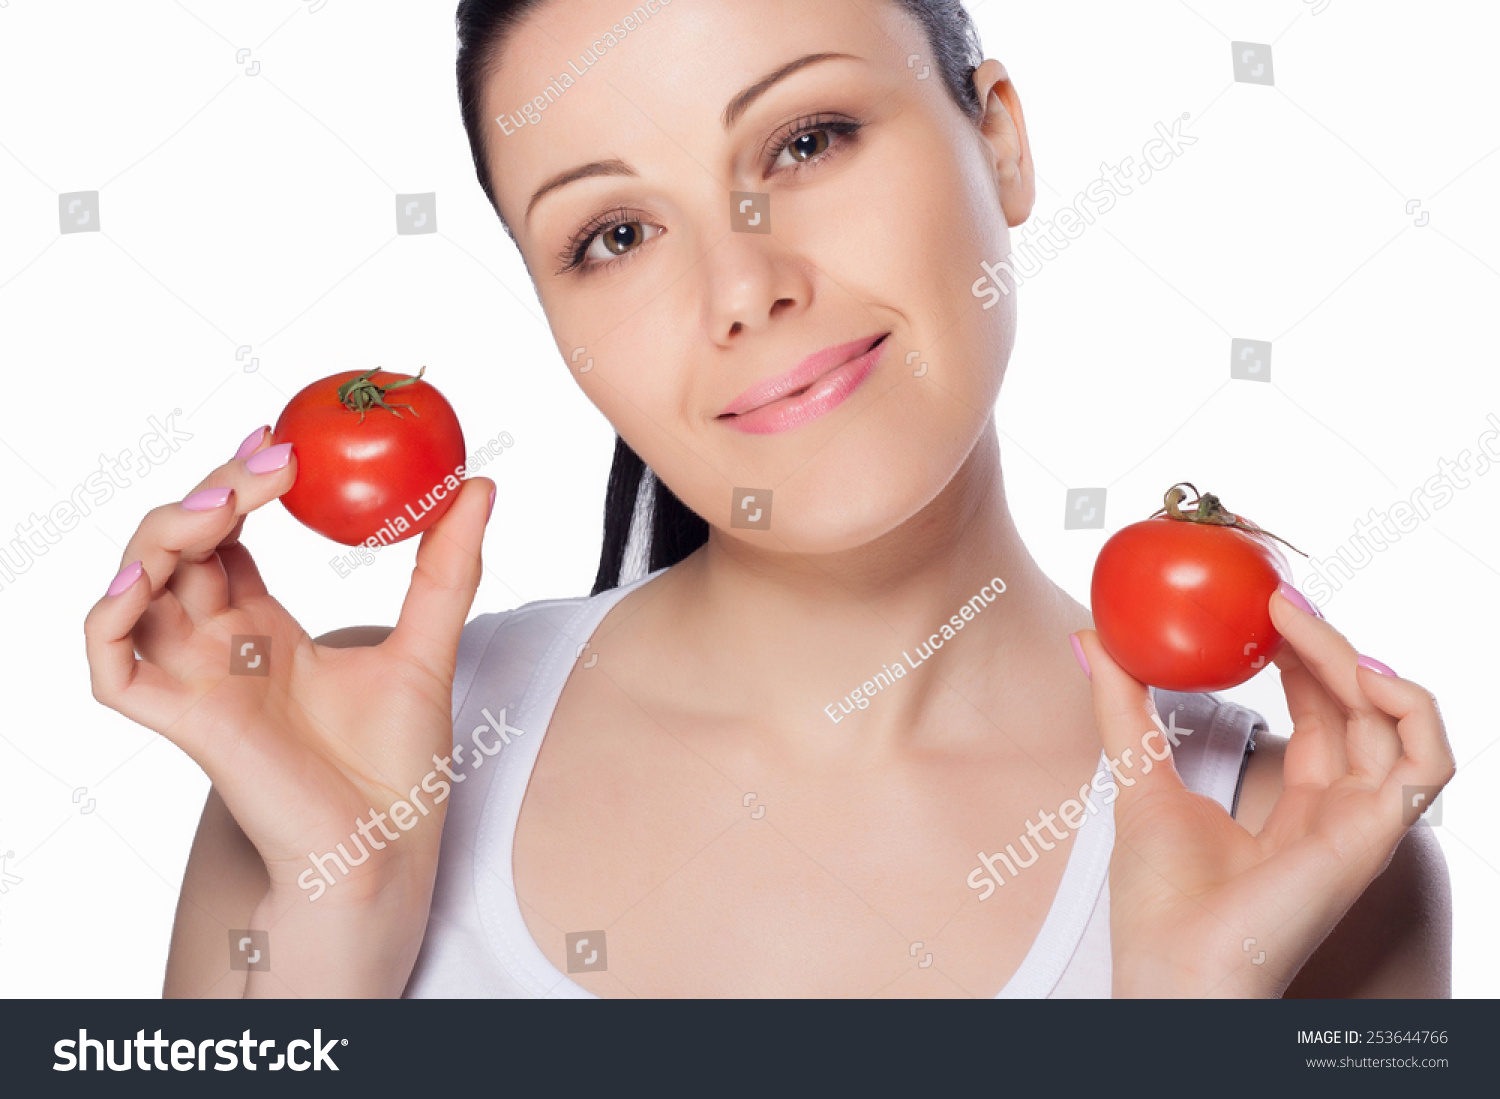 Beautiful close-up portrait of young woman with tomato. Healthy food and vegetables concept. Skin care and beauty. Vitamins and minerals. #253644766